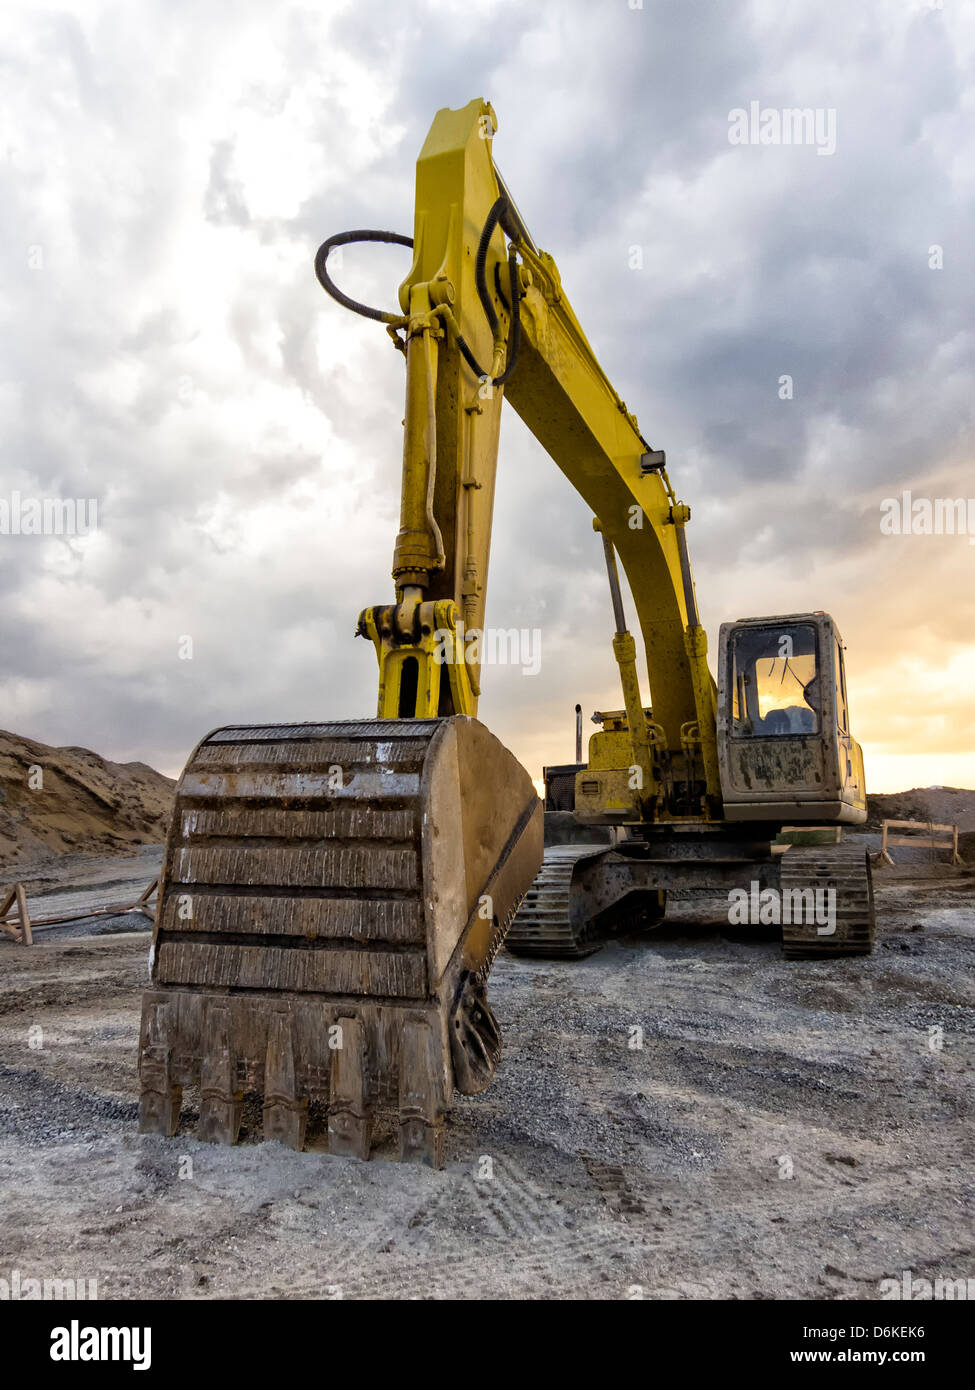 Yellow excavator loader machine at construction site over a cloudy sky Stock Photo